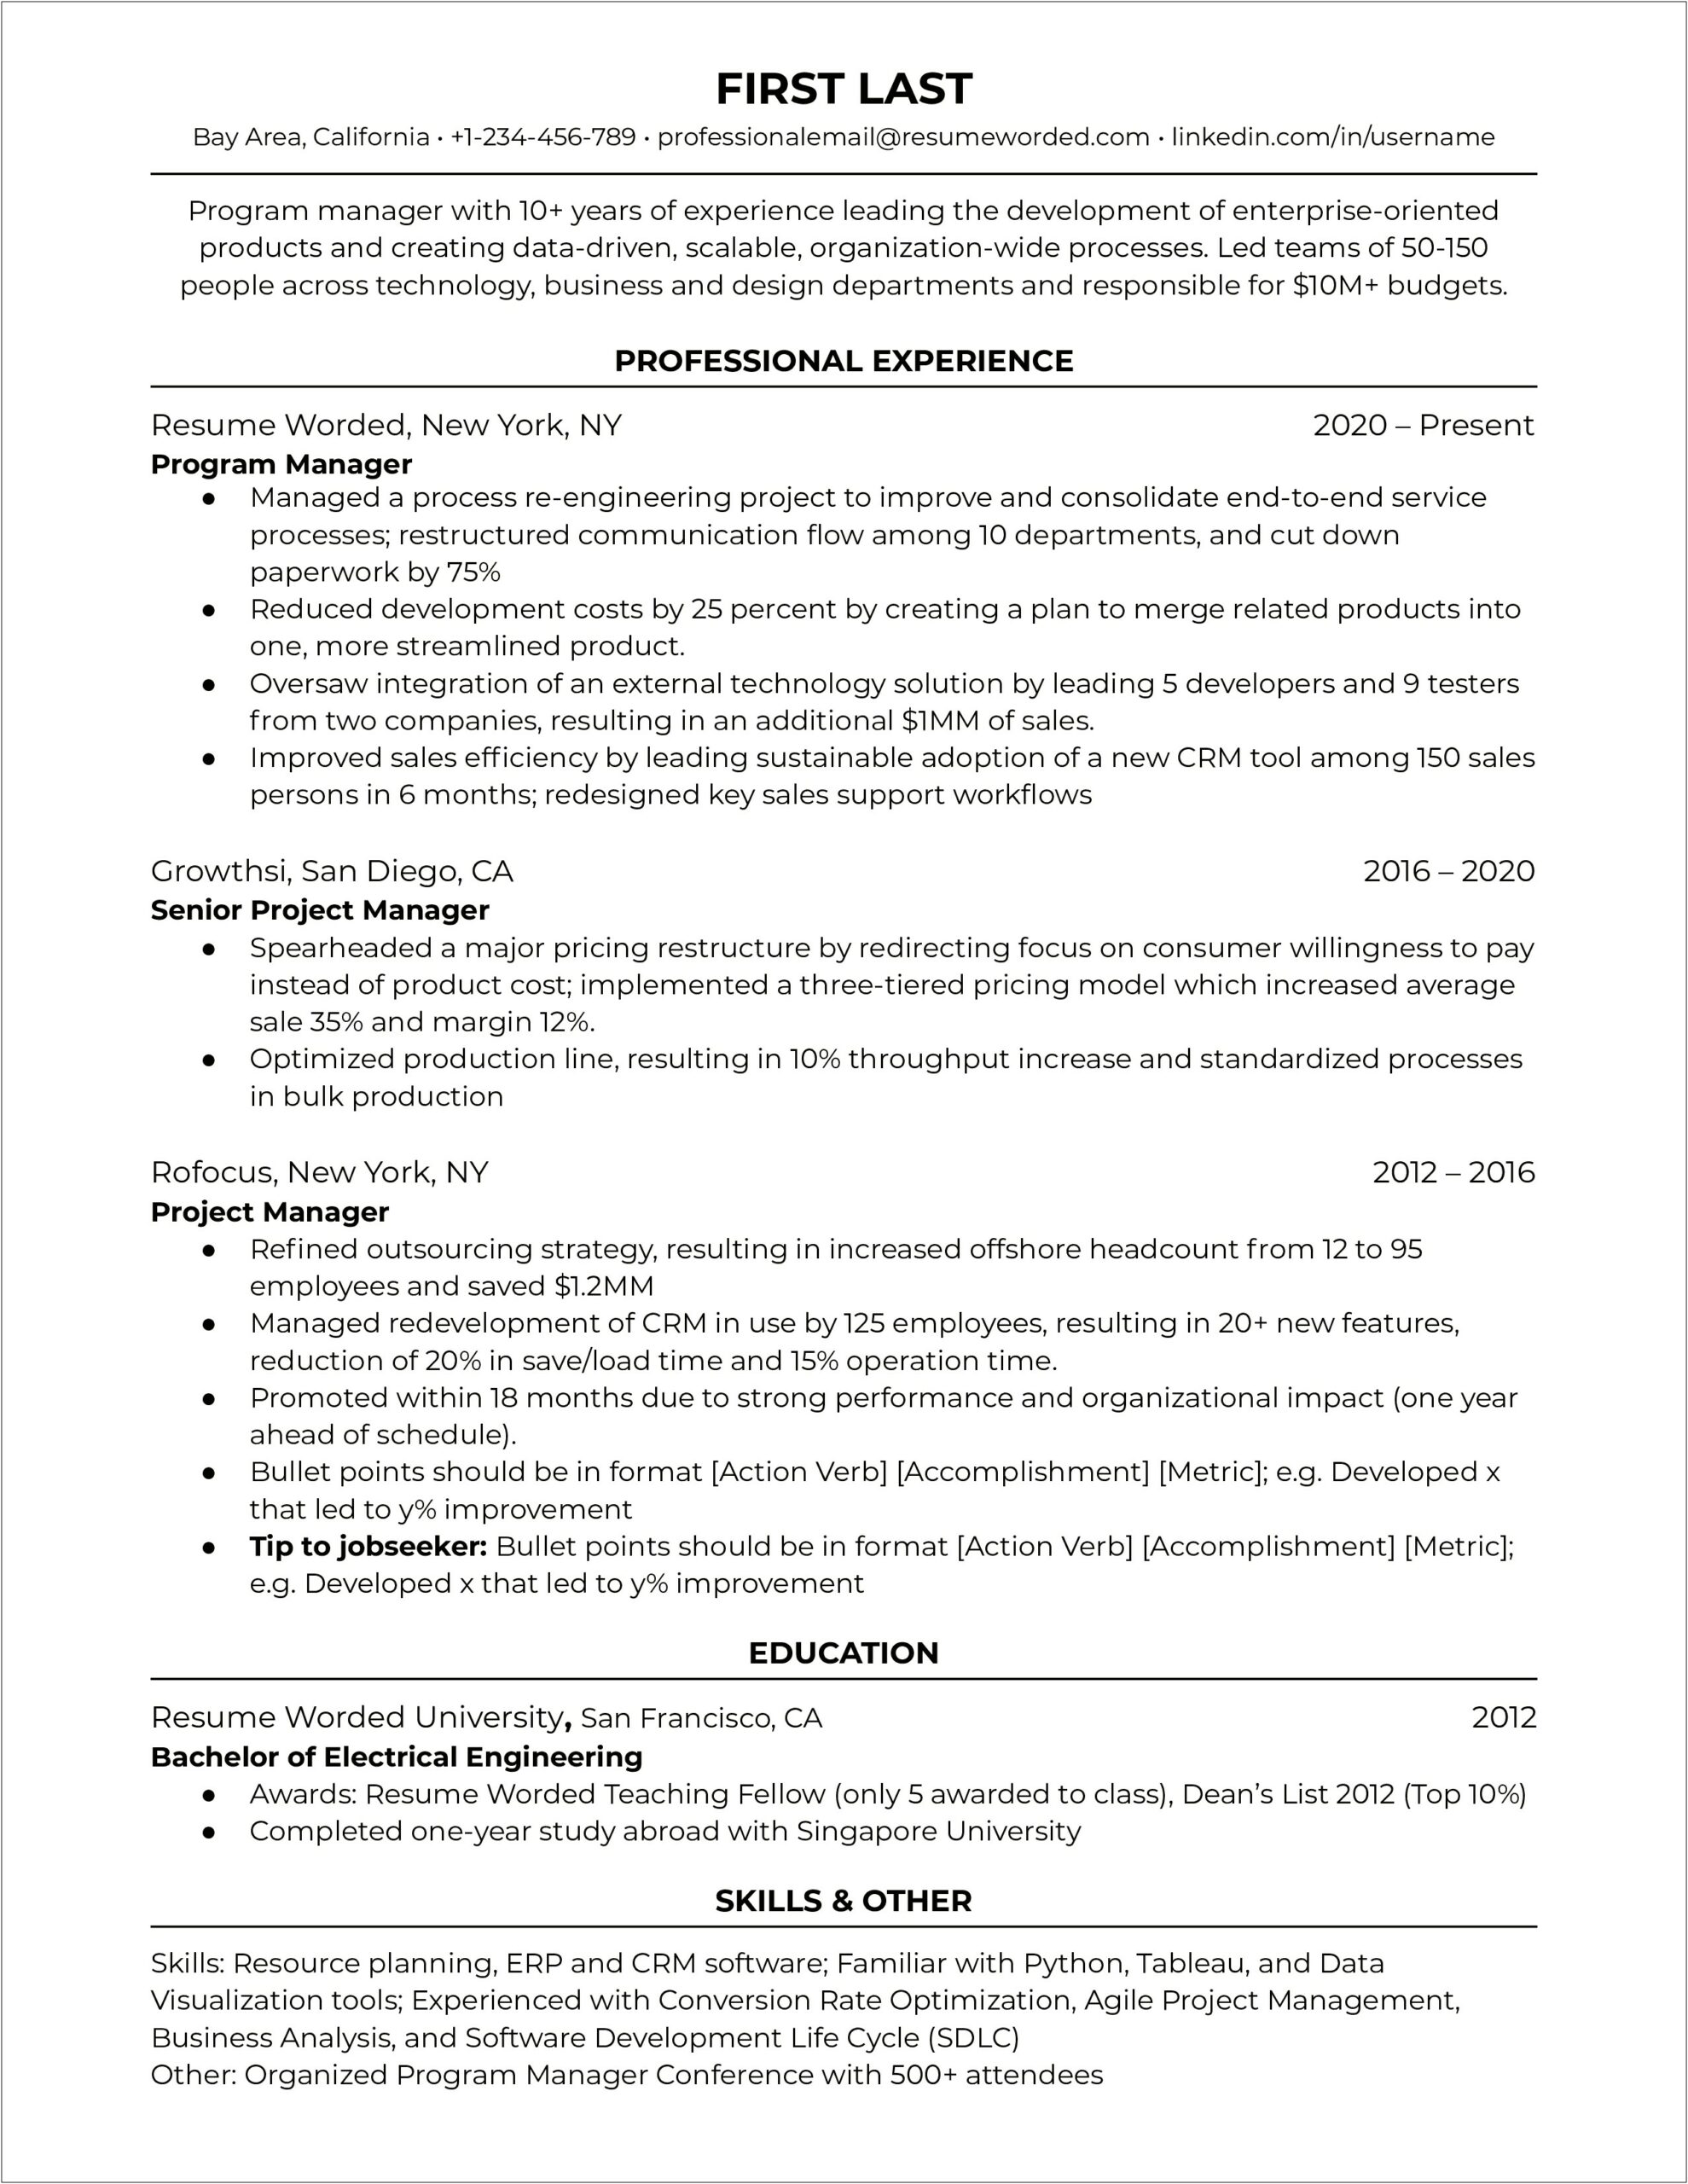 Resume Mid 50s 30 Years Professional Experience